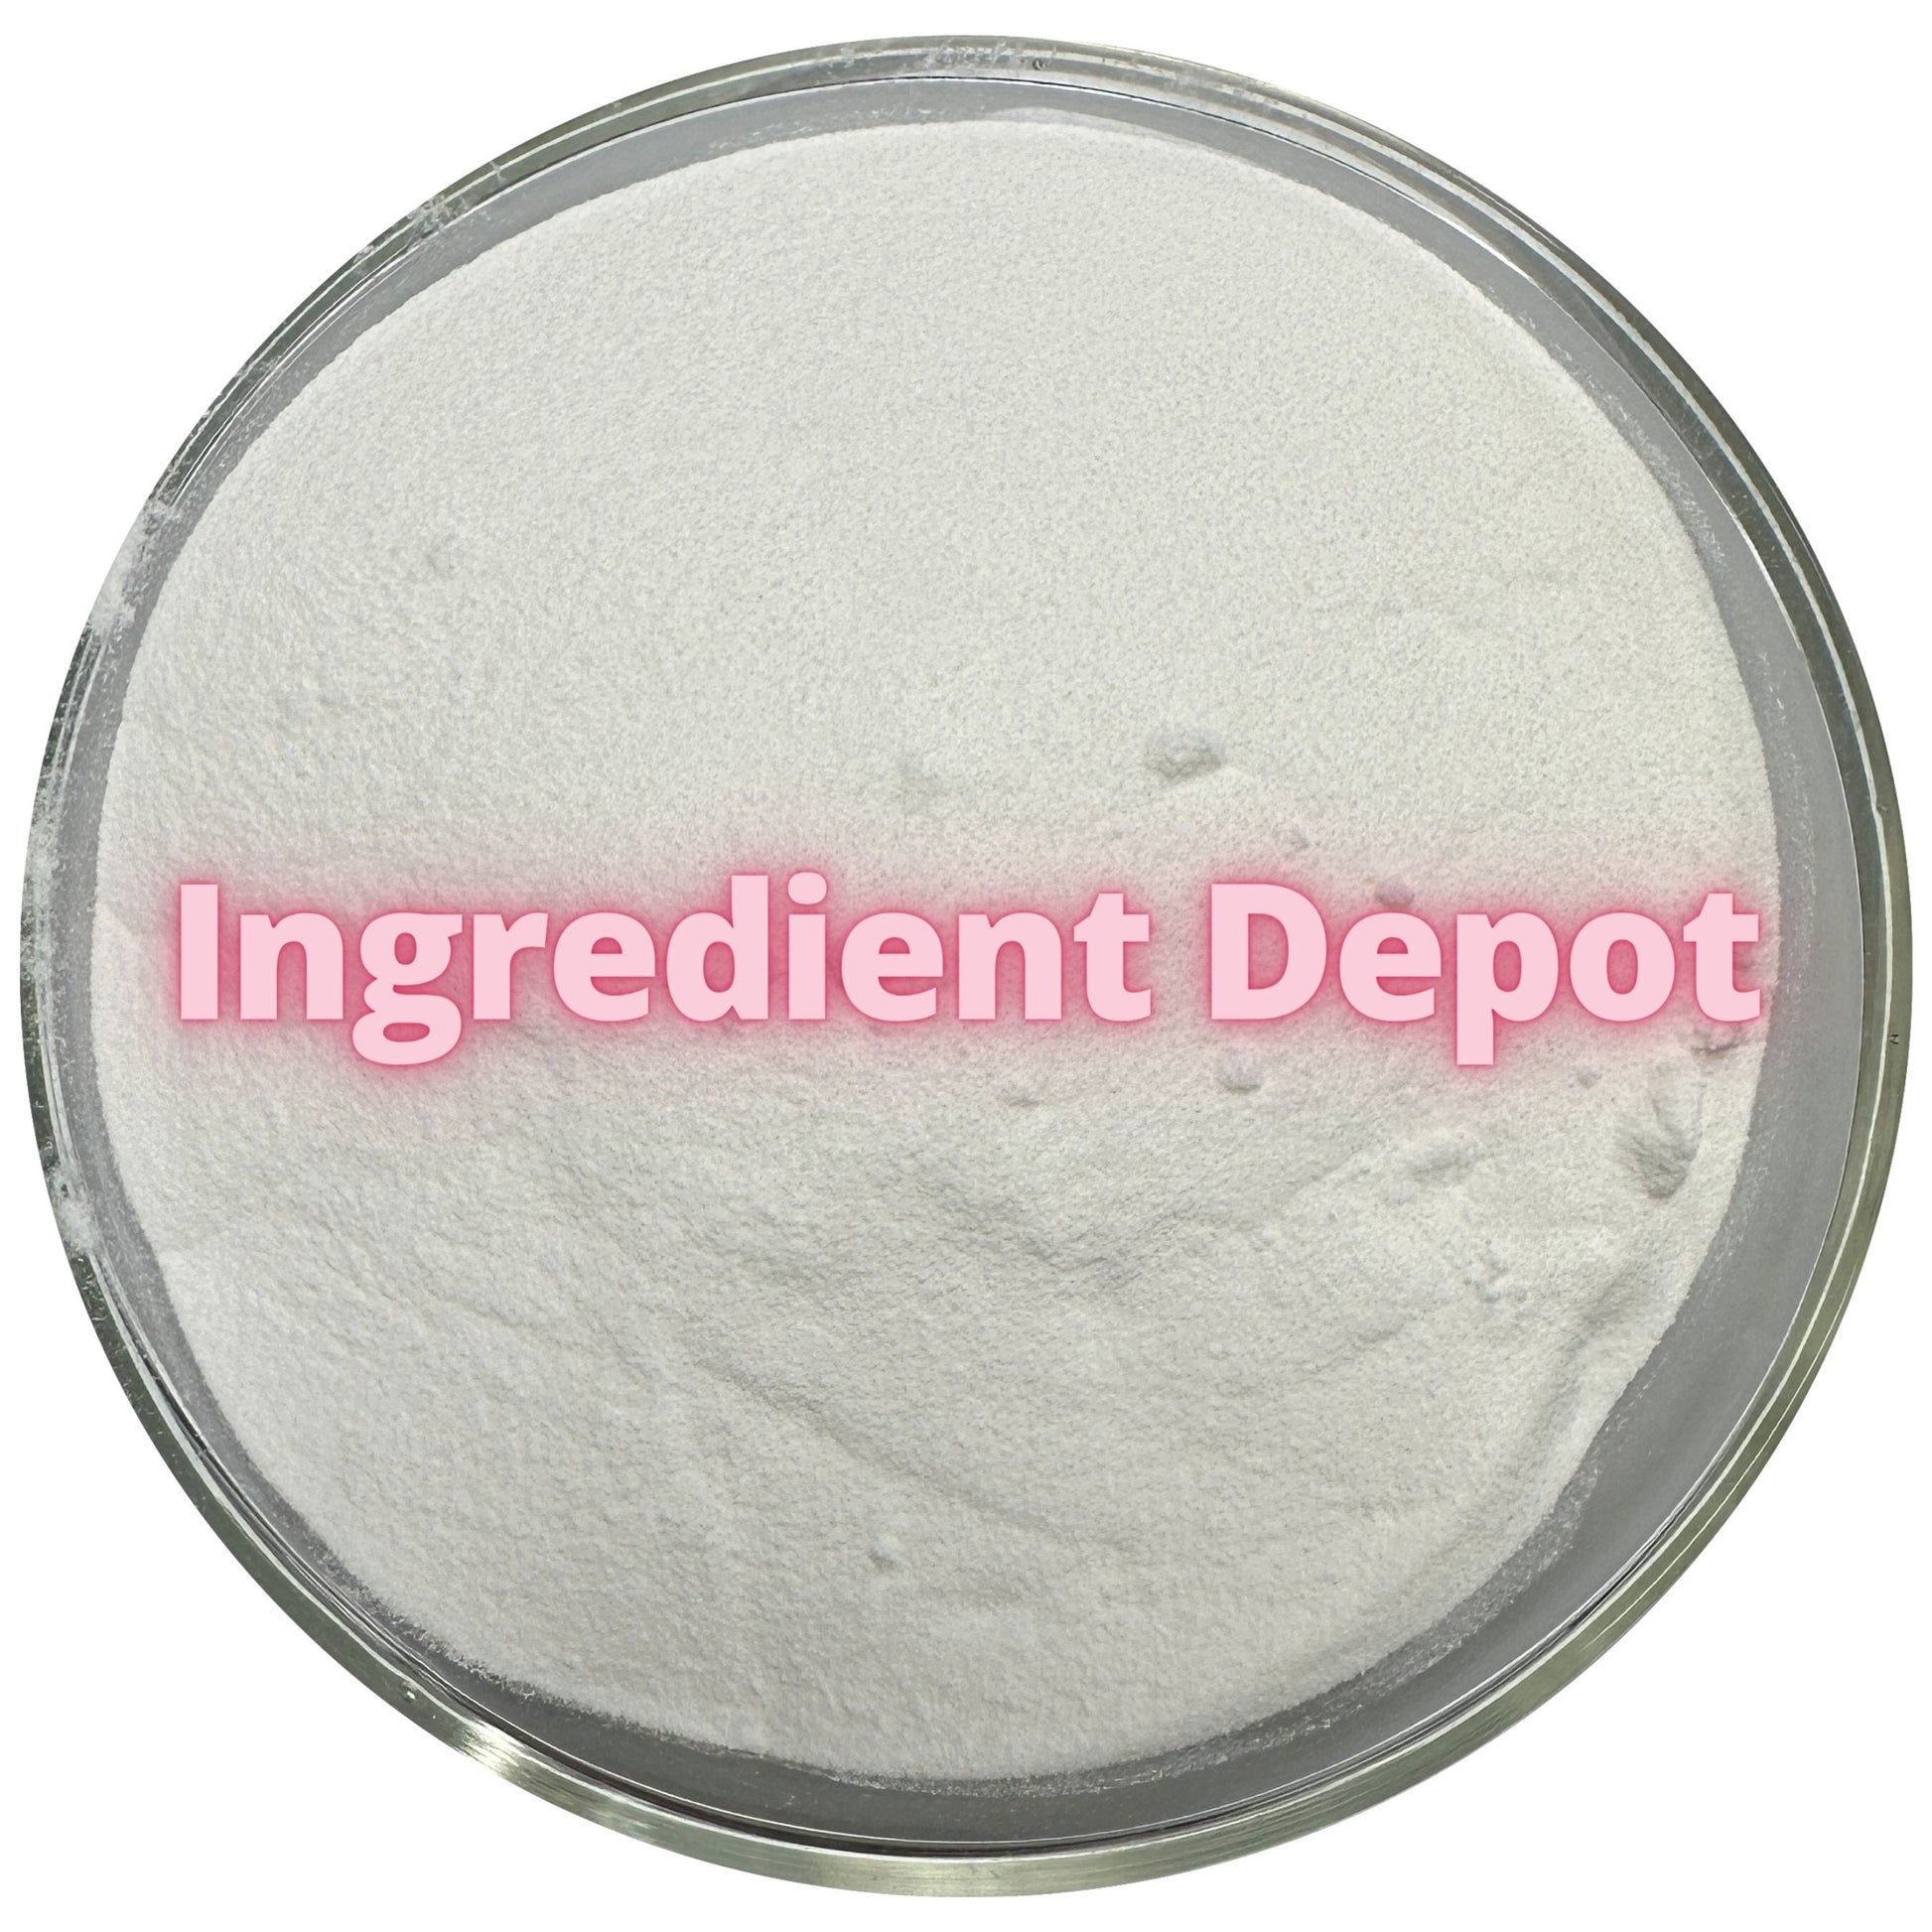 SMCC 90 HD Silicified Microcrystalline Cellulose - USP/NF Grade 1 kg - Ingredient Depot